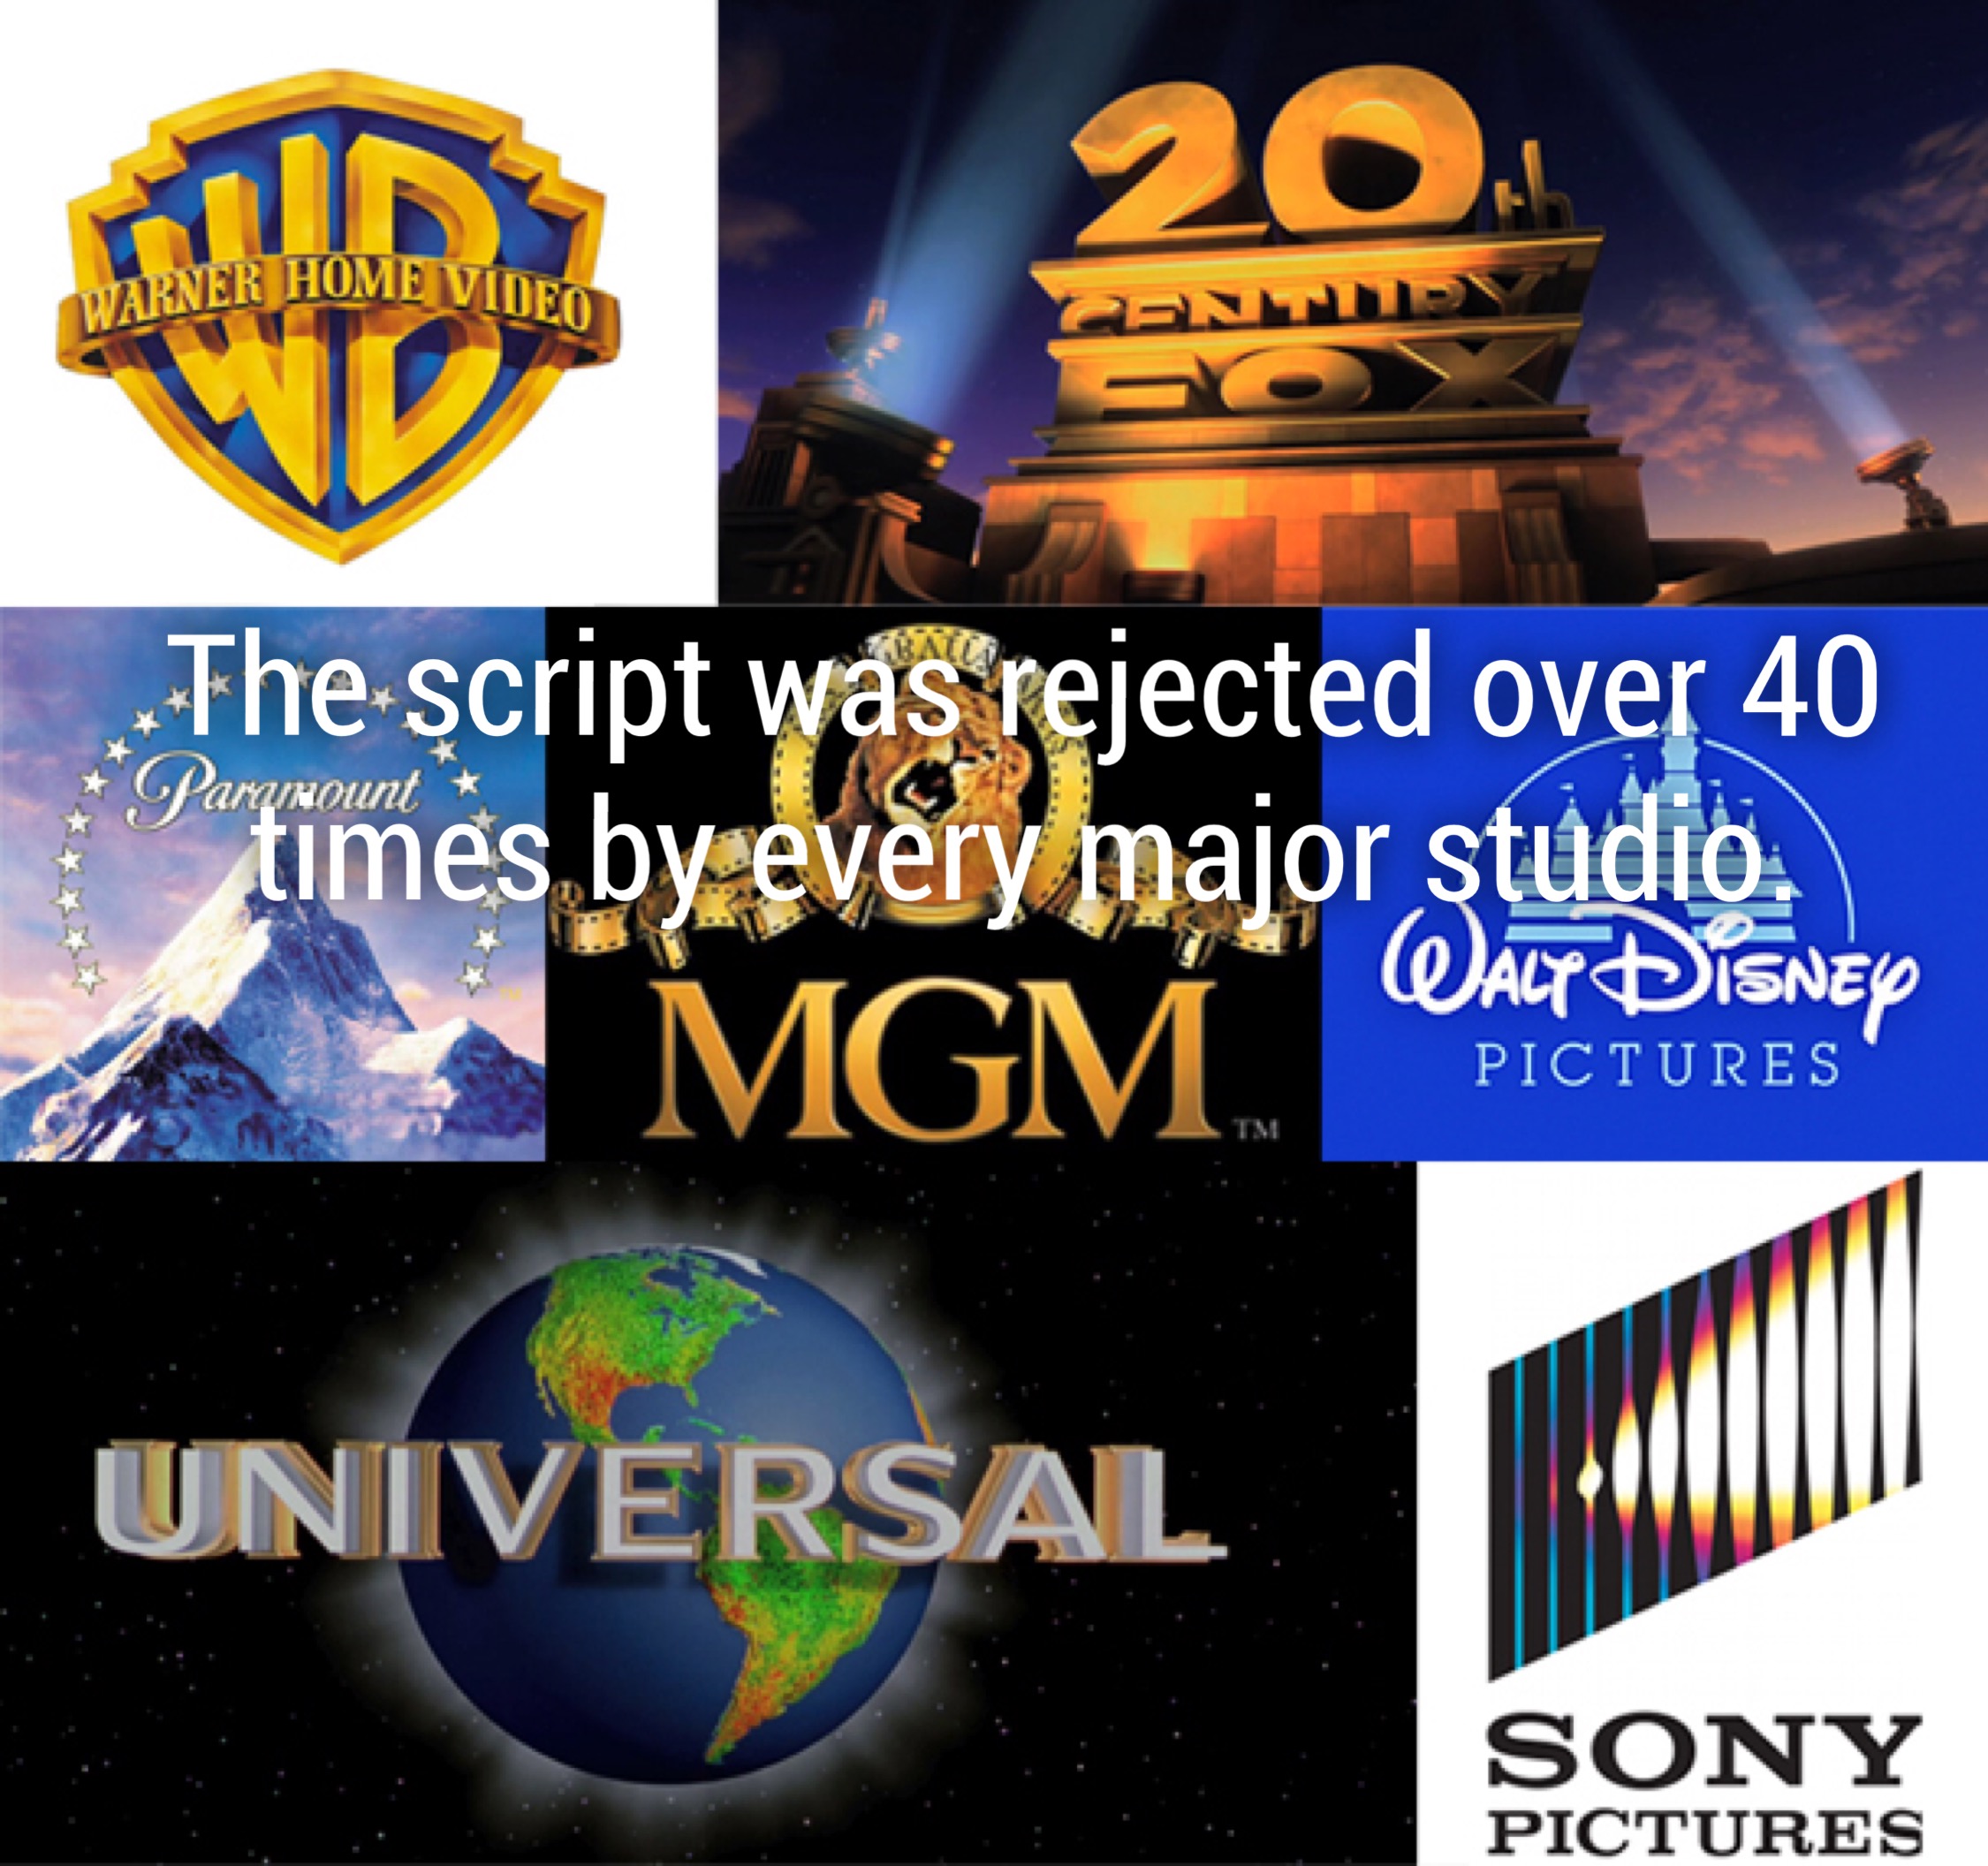 wb universal disney fox paramount mgm columbia - Warner Home Video The script was rejected over 40 "times by every major studio. Walt Disney Mgm. Pictures Universal Sony Pictures